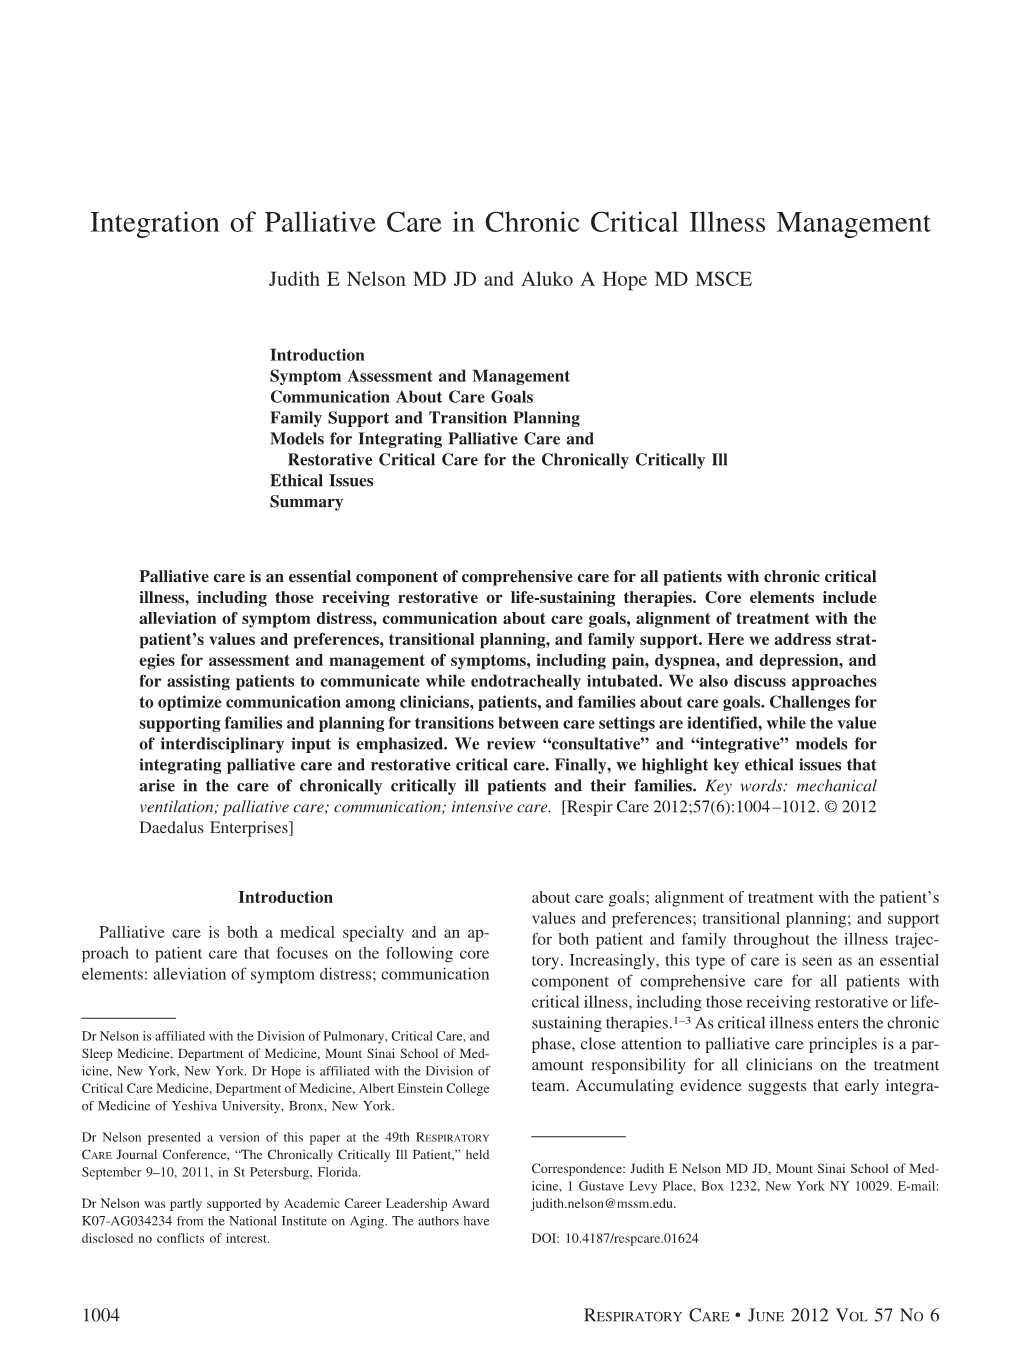 Integration of Palliative Care in Chronic Critical Illness Management